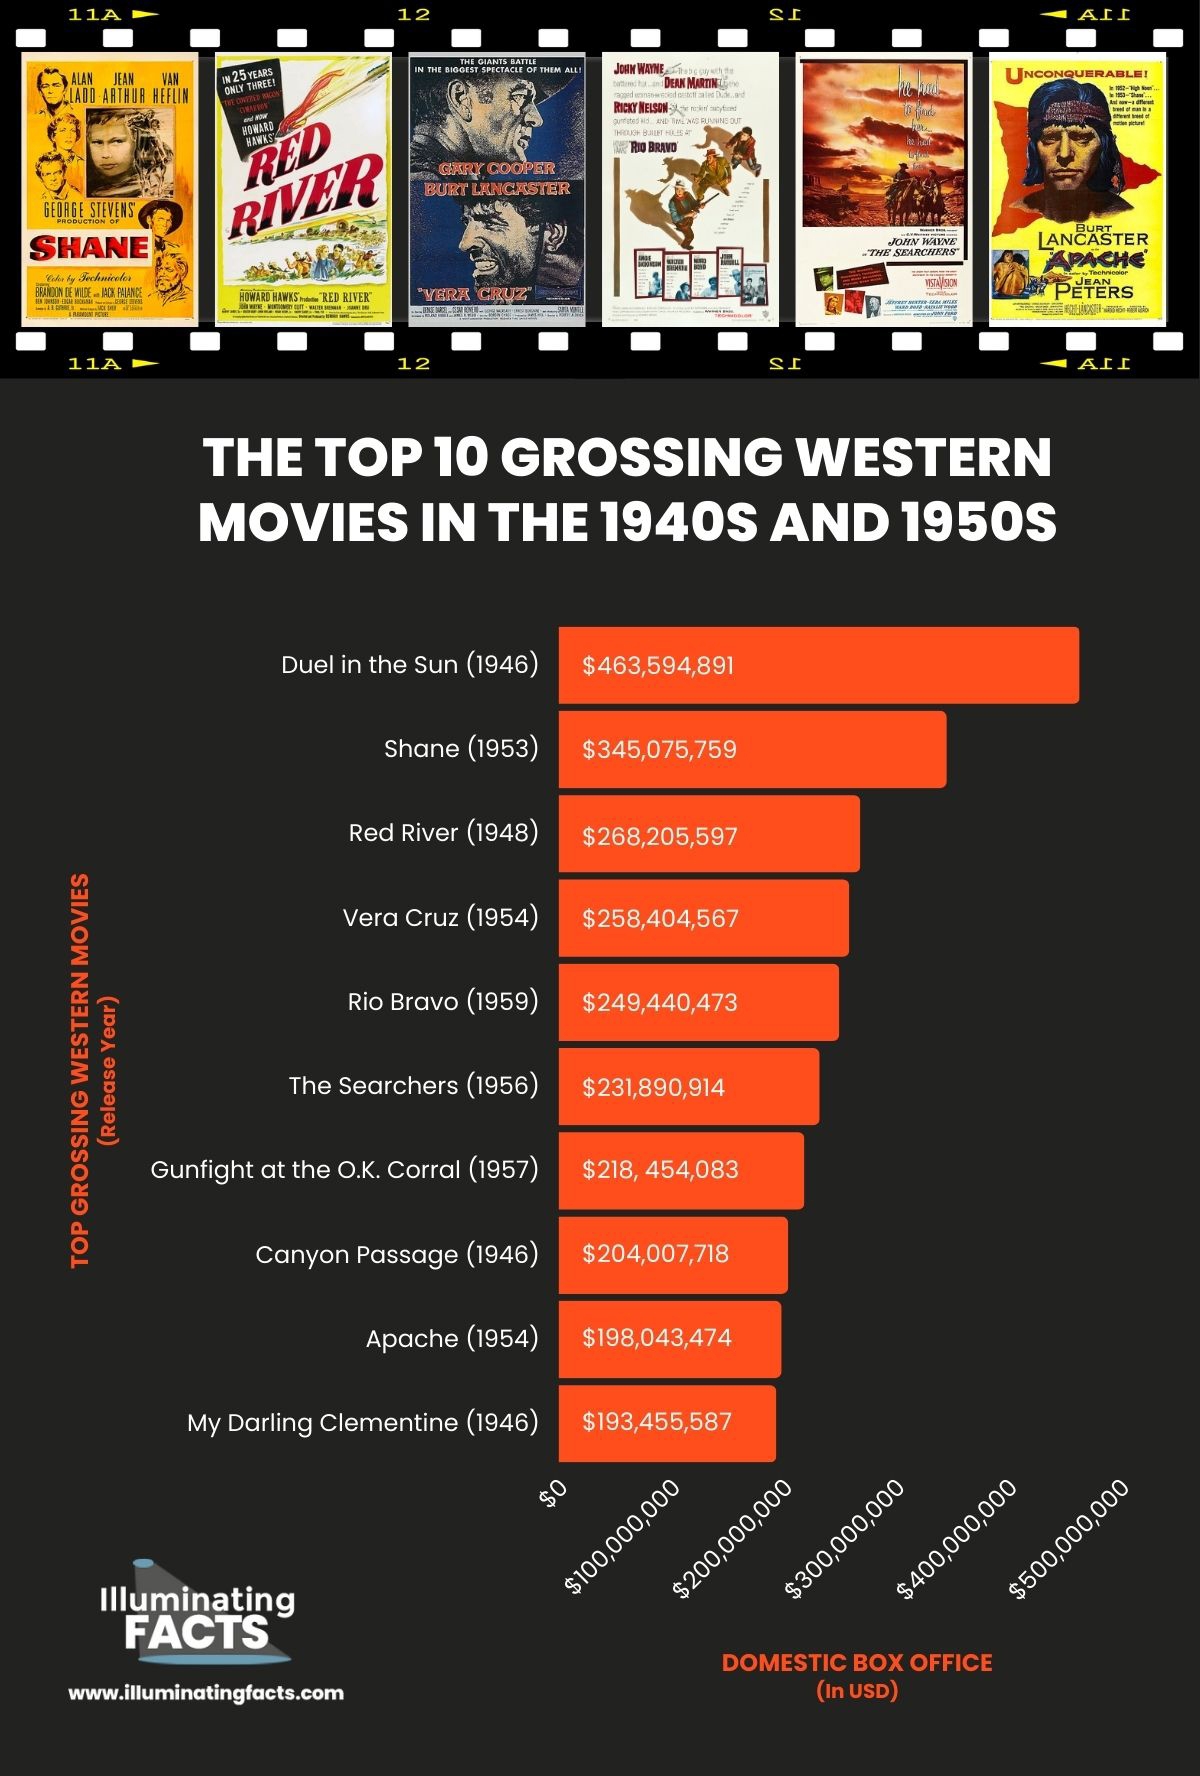 The Top 10 Grossing Western Movies in the 1940s and 1950s